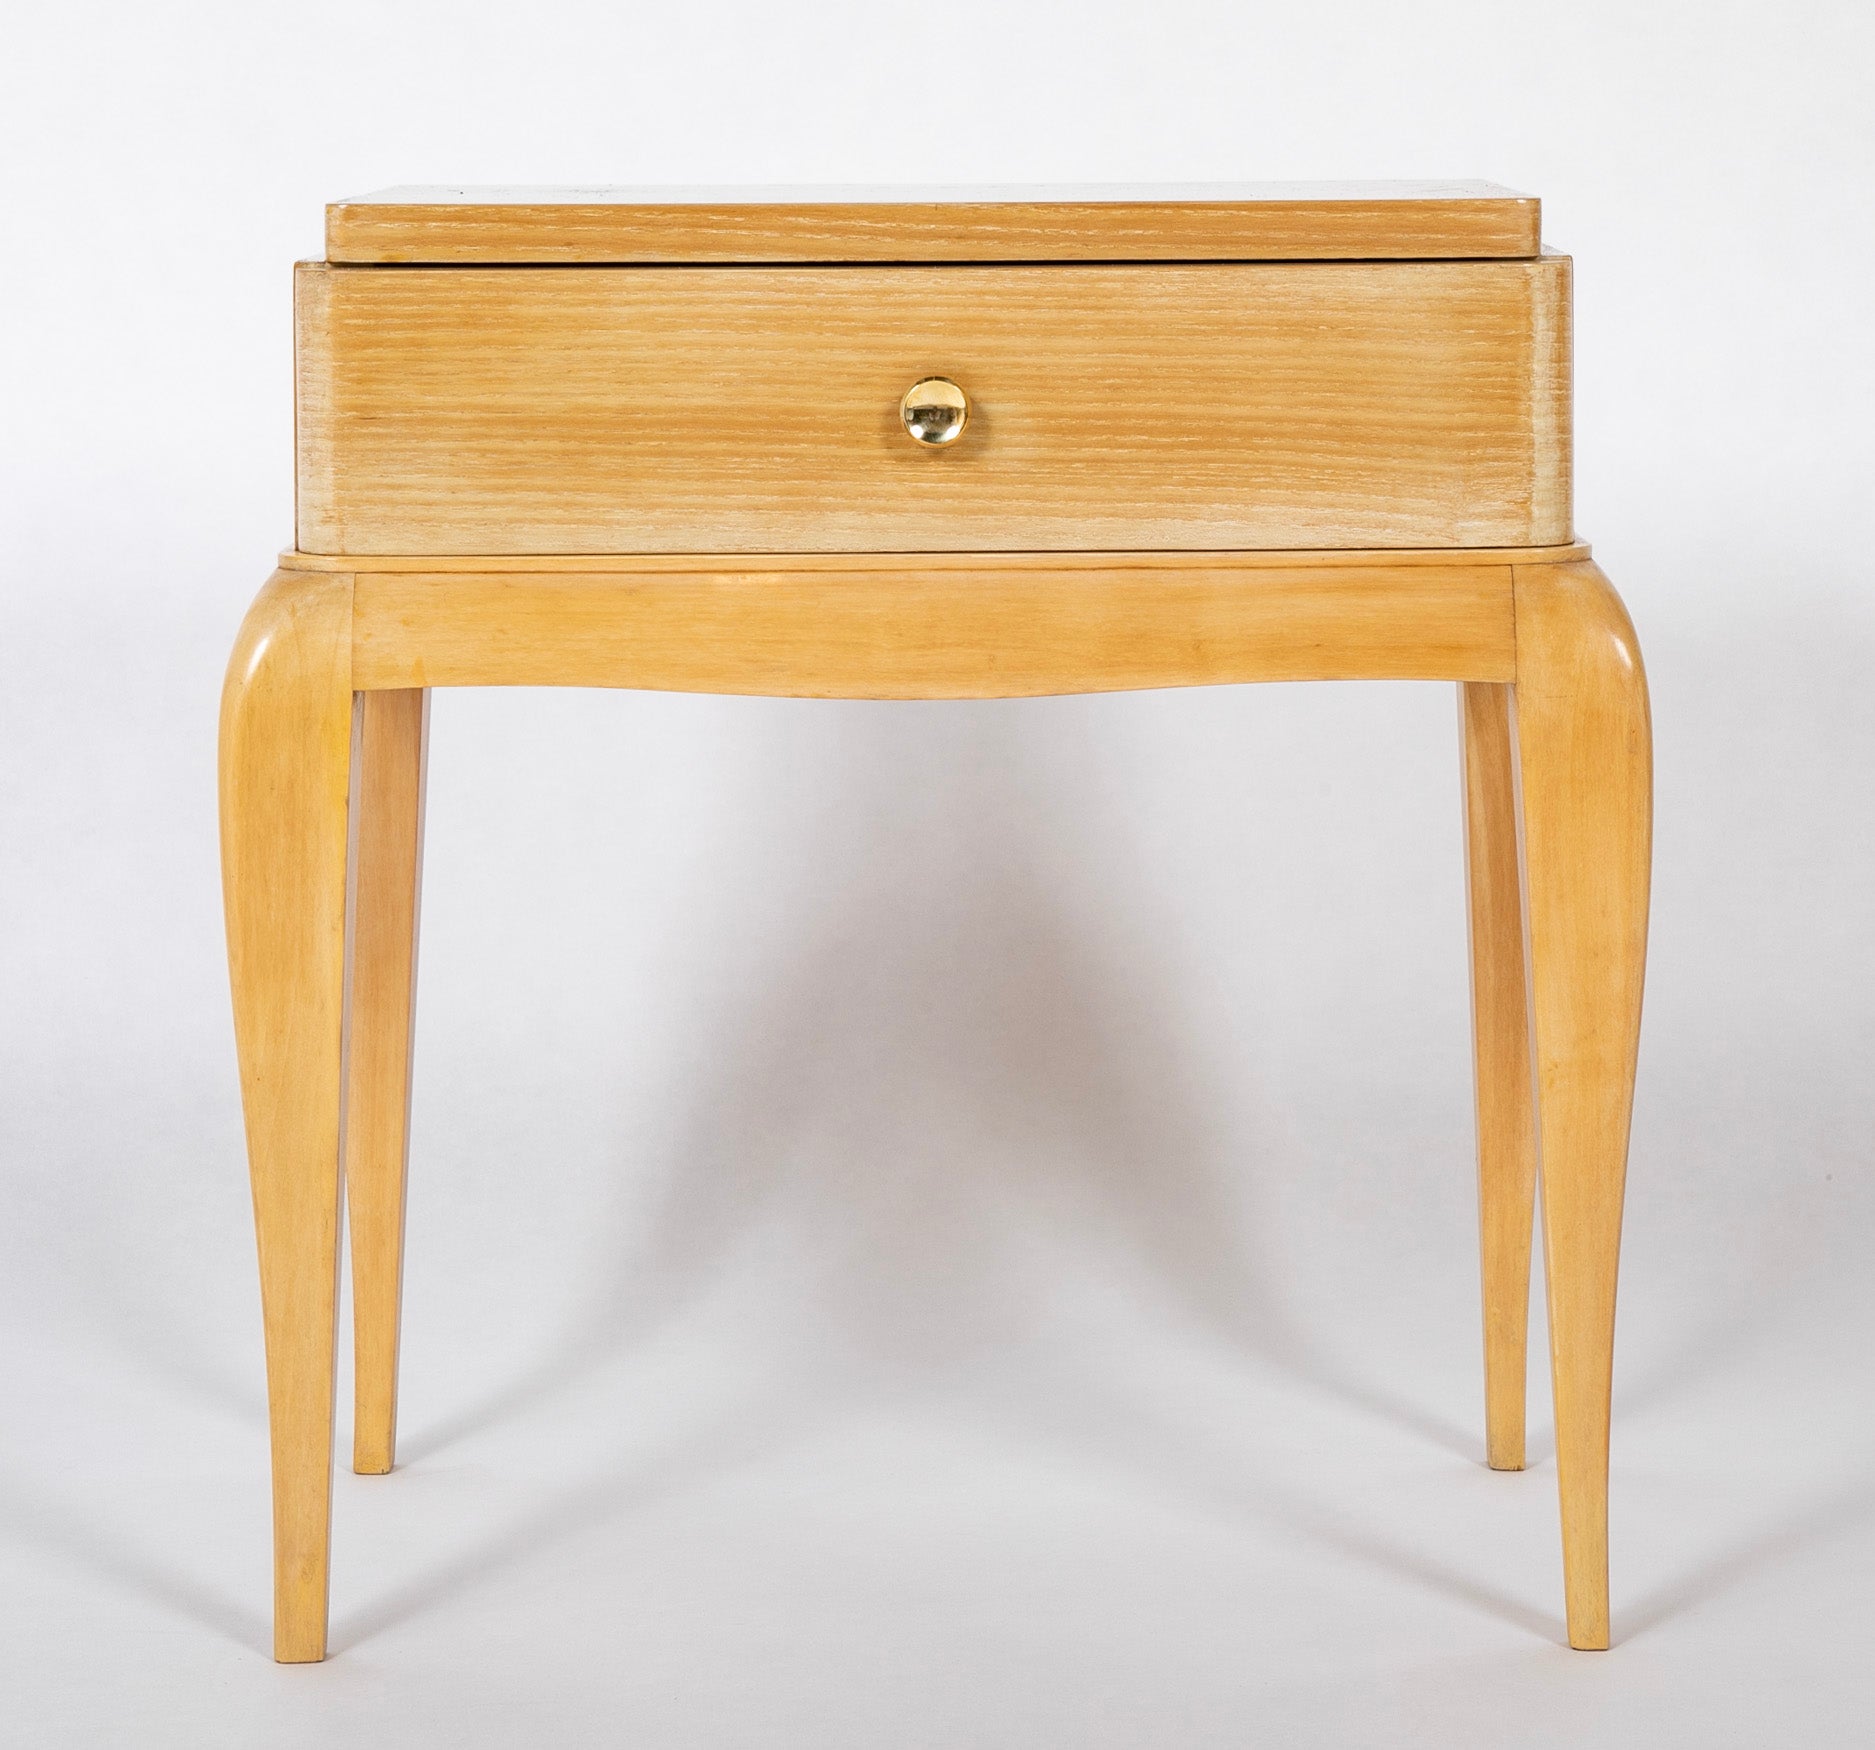 Pair of French Single Drawer Sycamore Veneer Bedside Tables